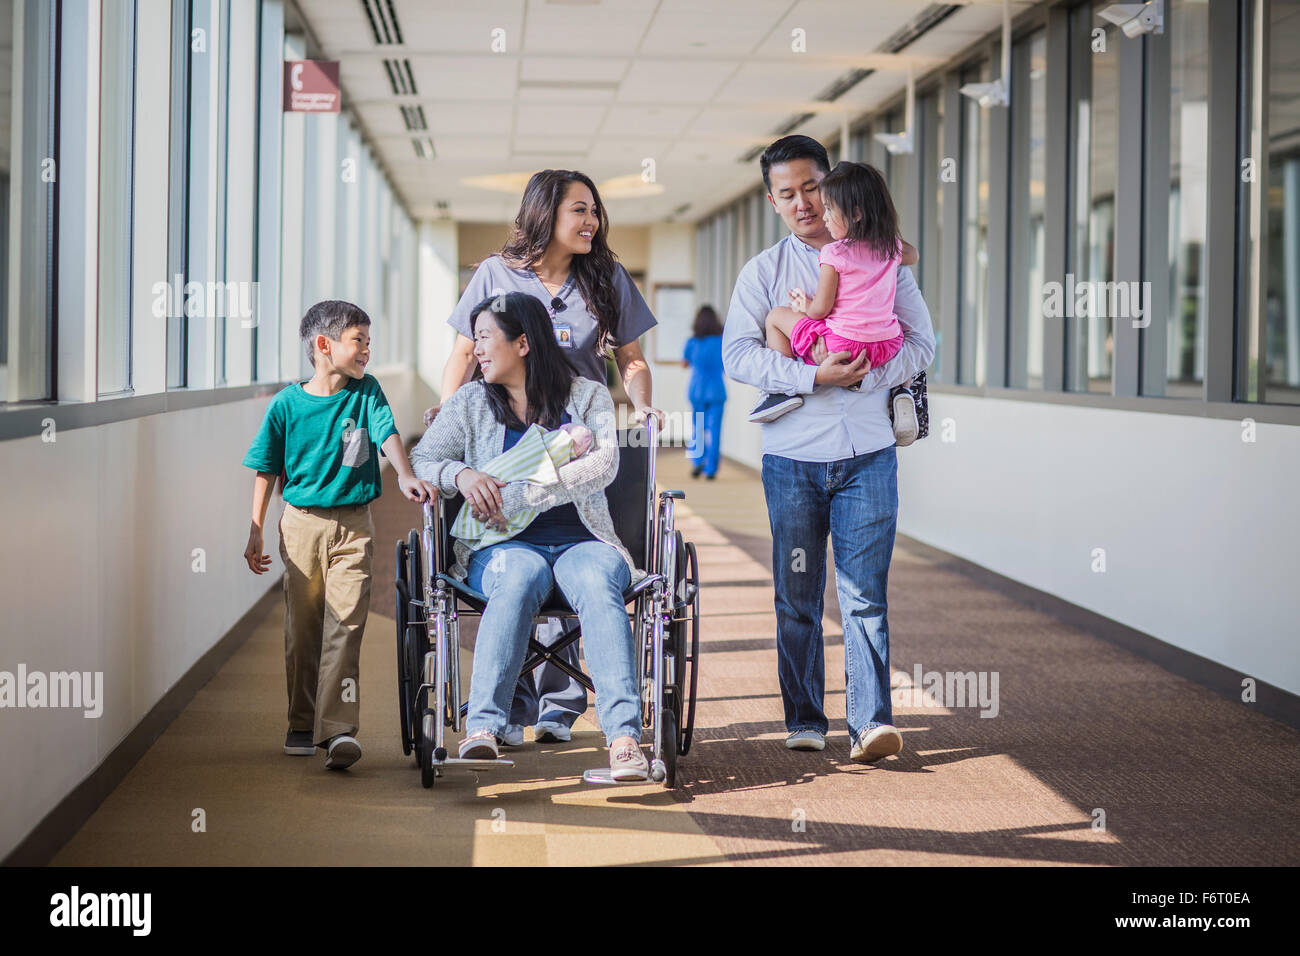 Nurse with patient and family in hospital hallway Stock Photo